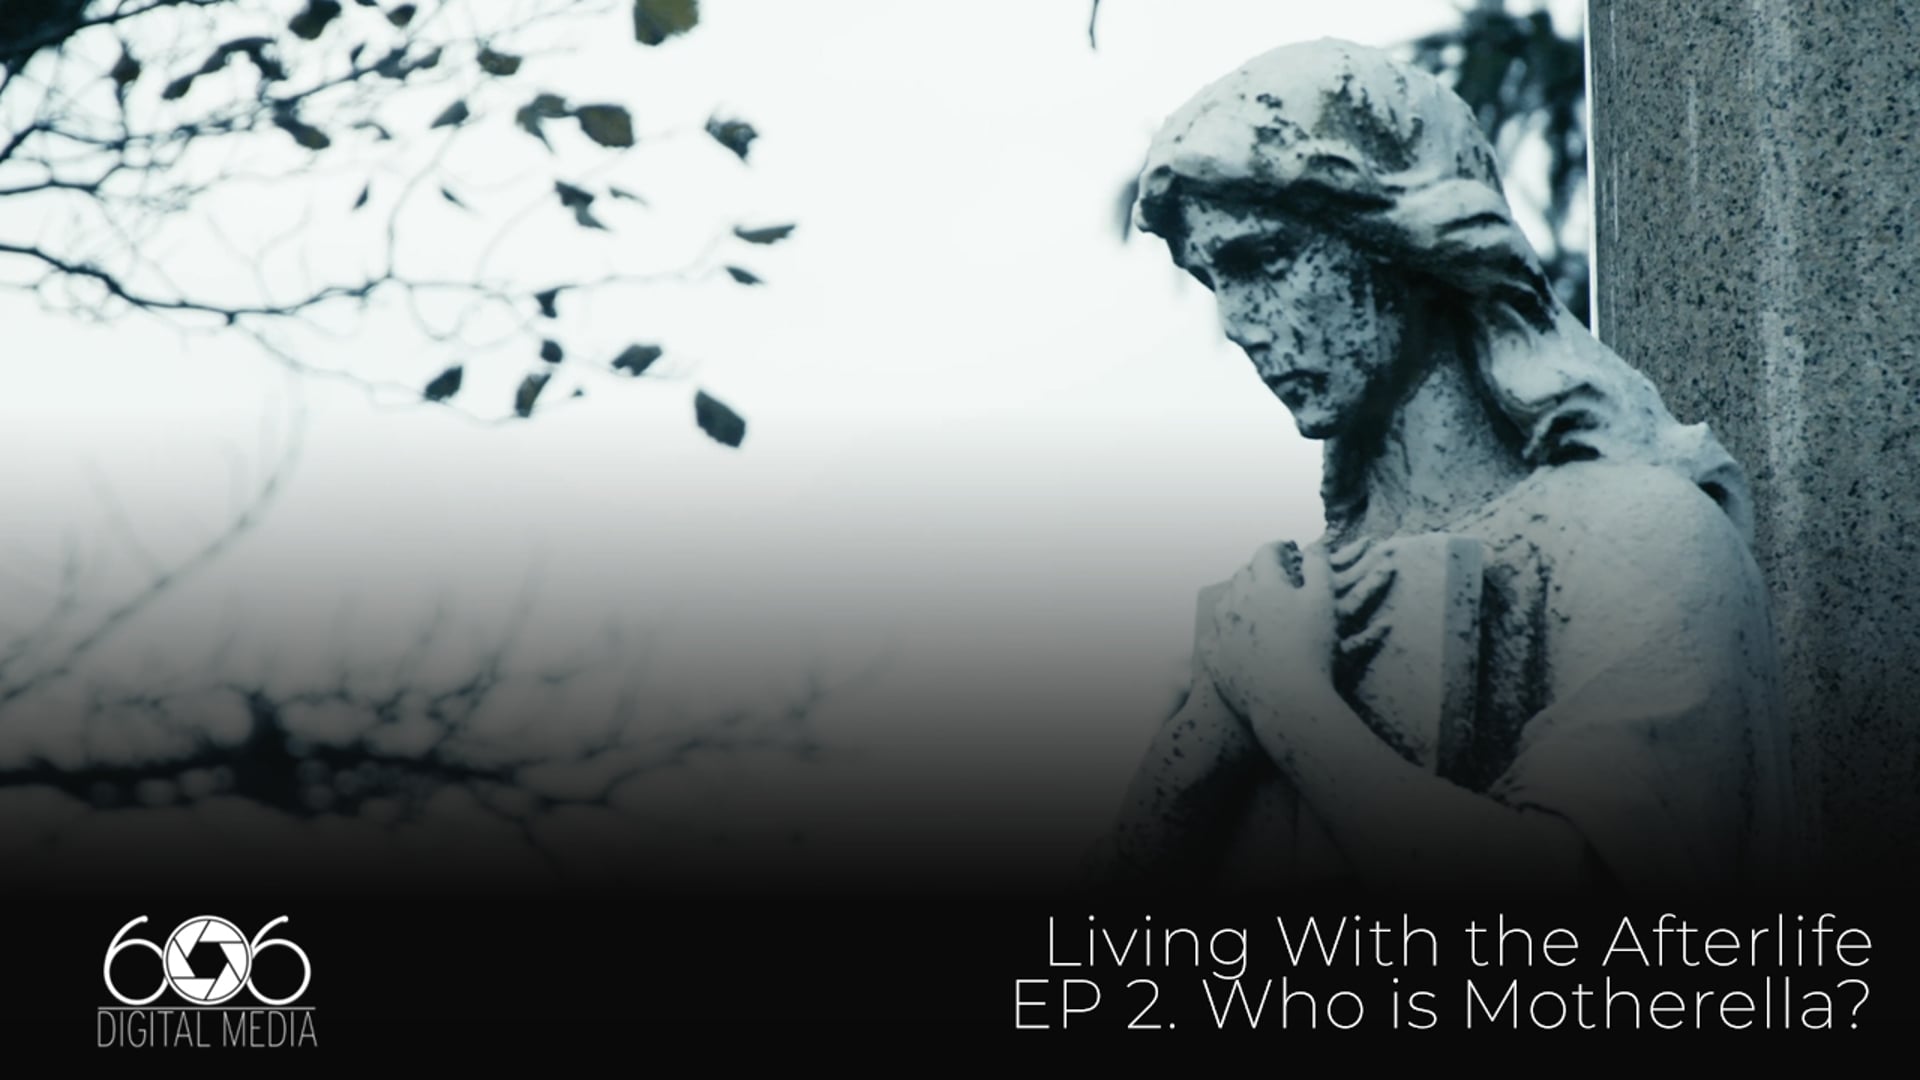 Living With The Afterlife Ep 2. Who is Motherella?